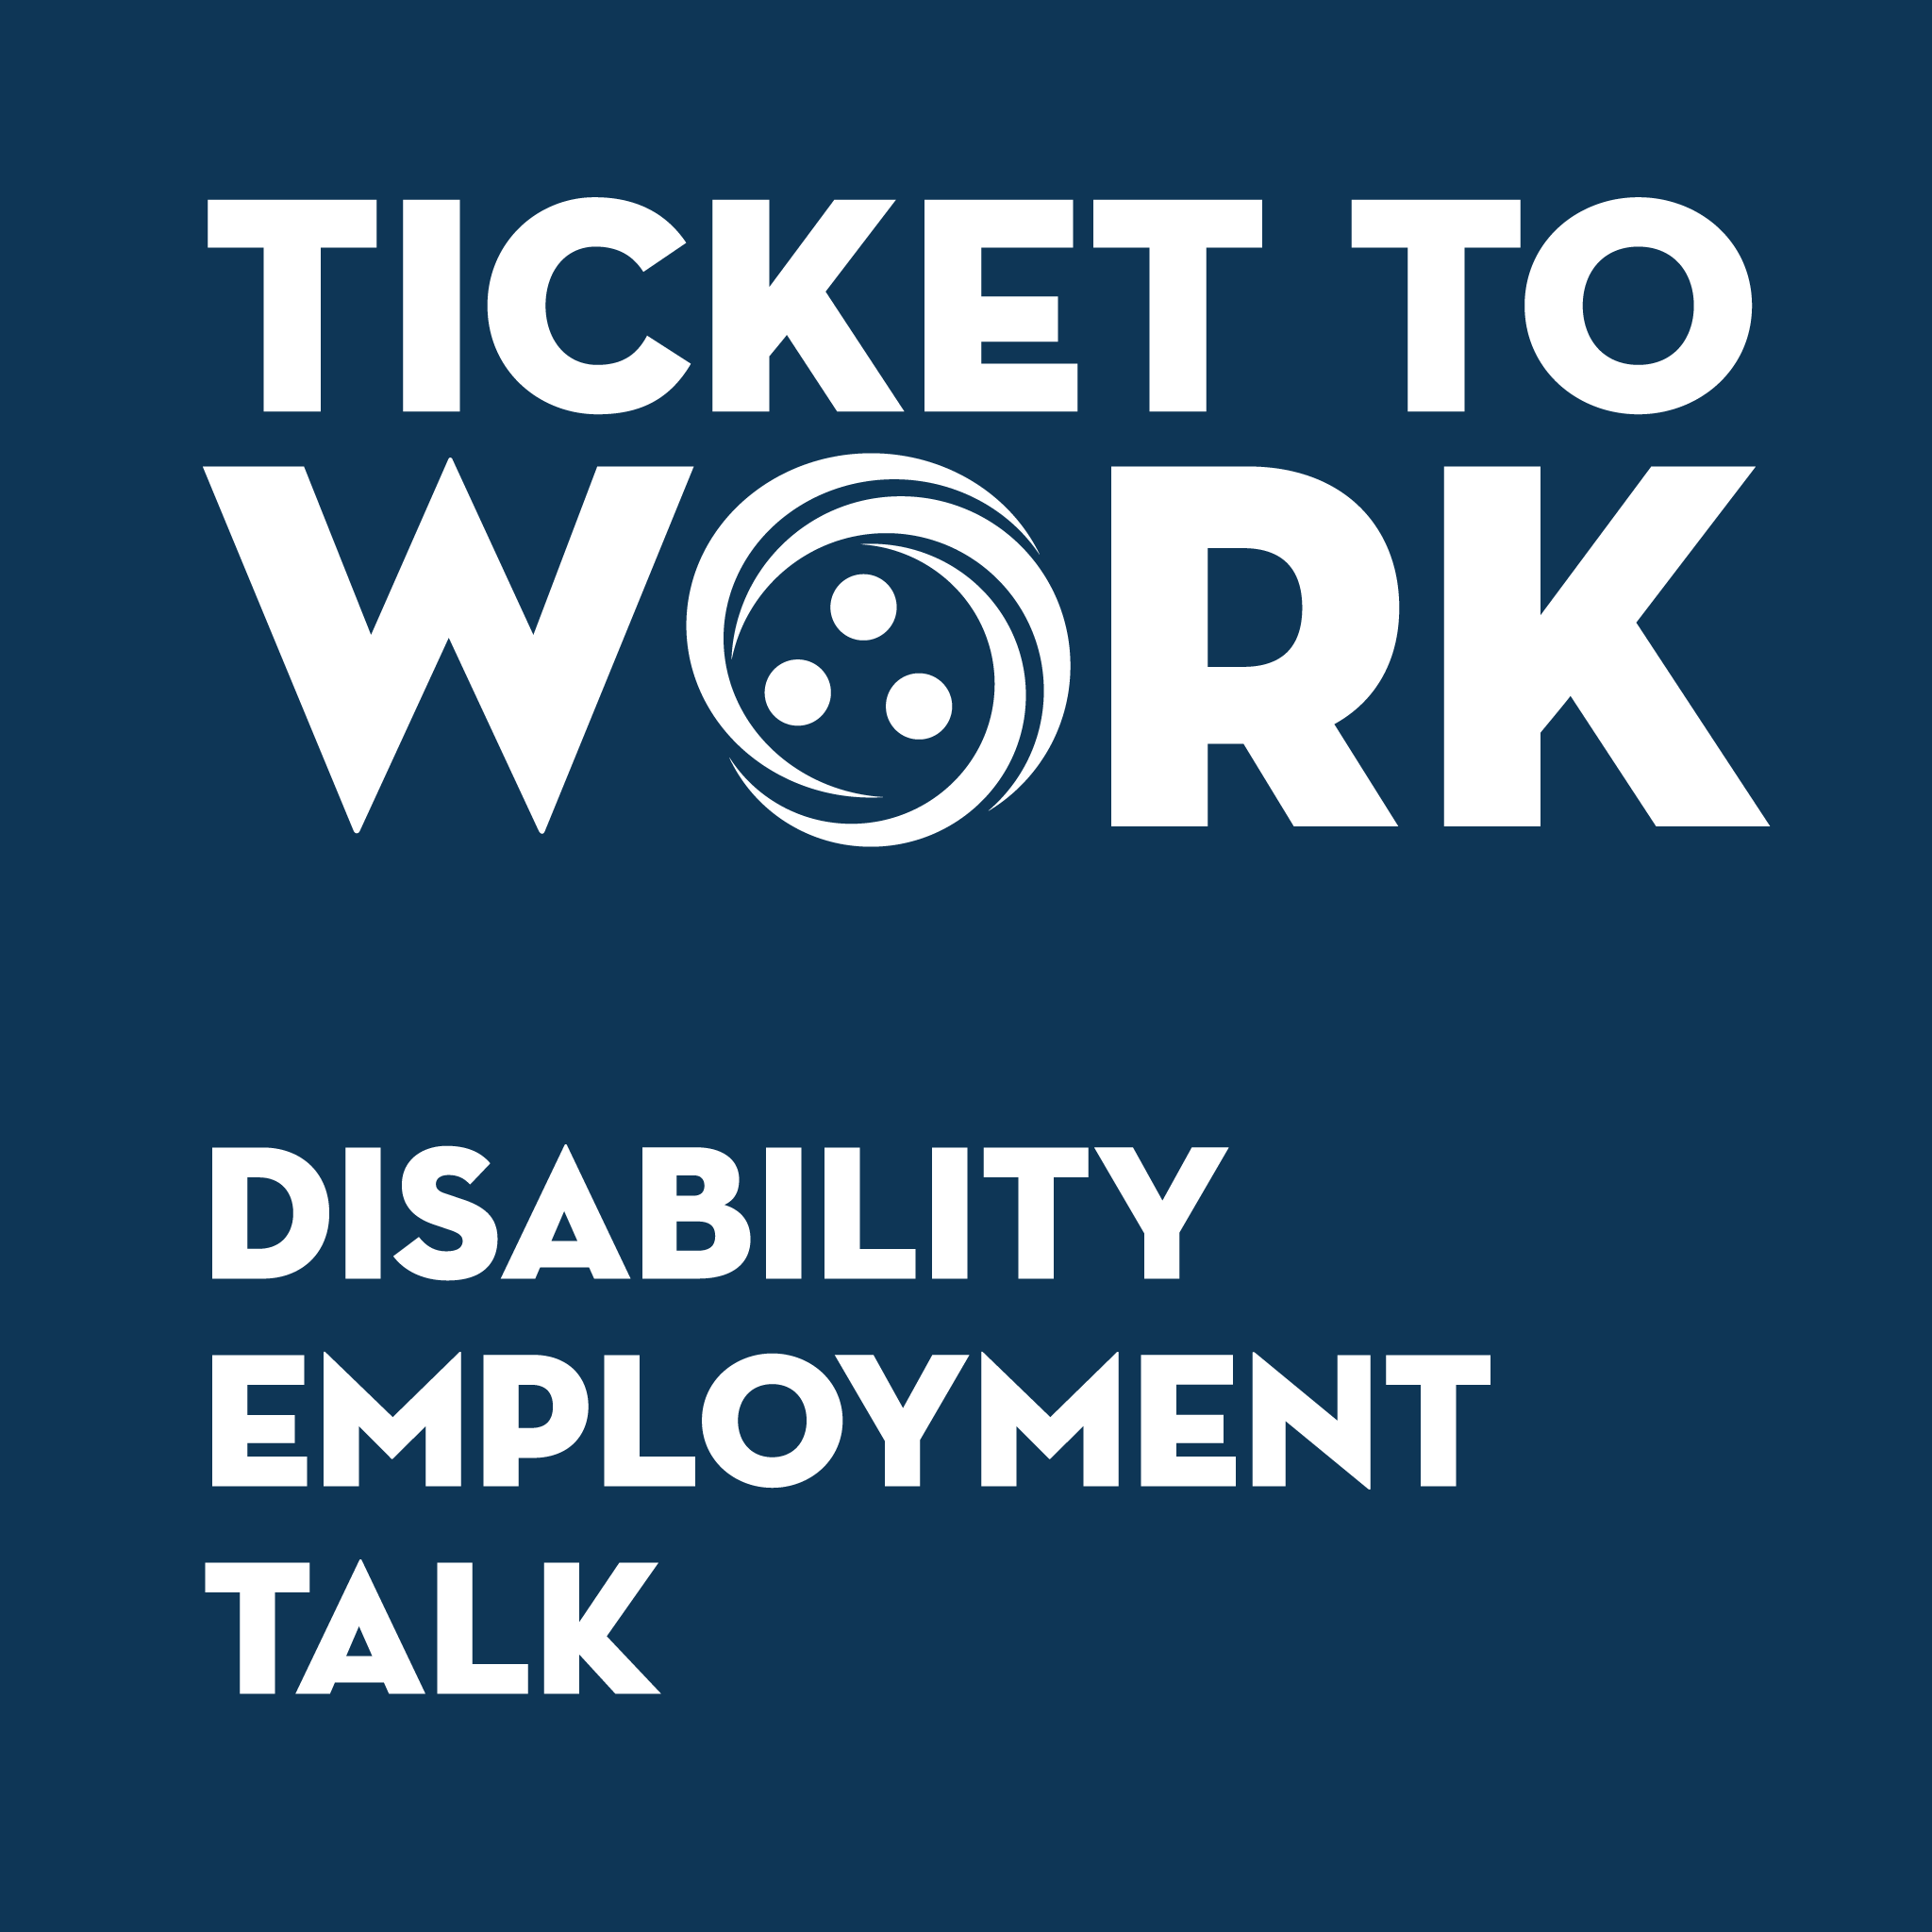 Ticket Talk #1: Introducing Ticket To Work Podcasts - Ticket to Work - Social Security